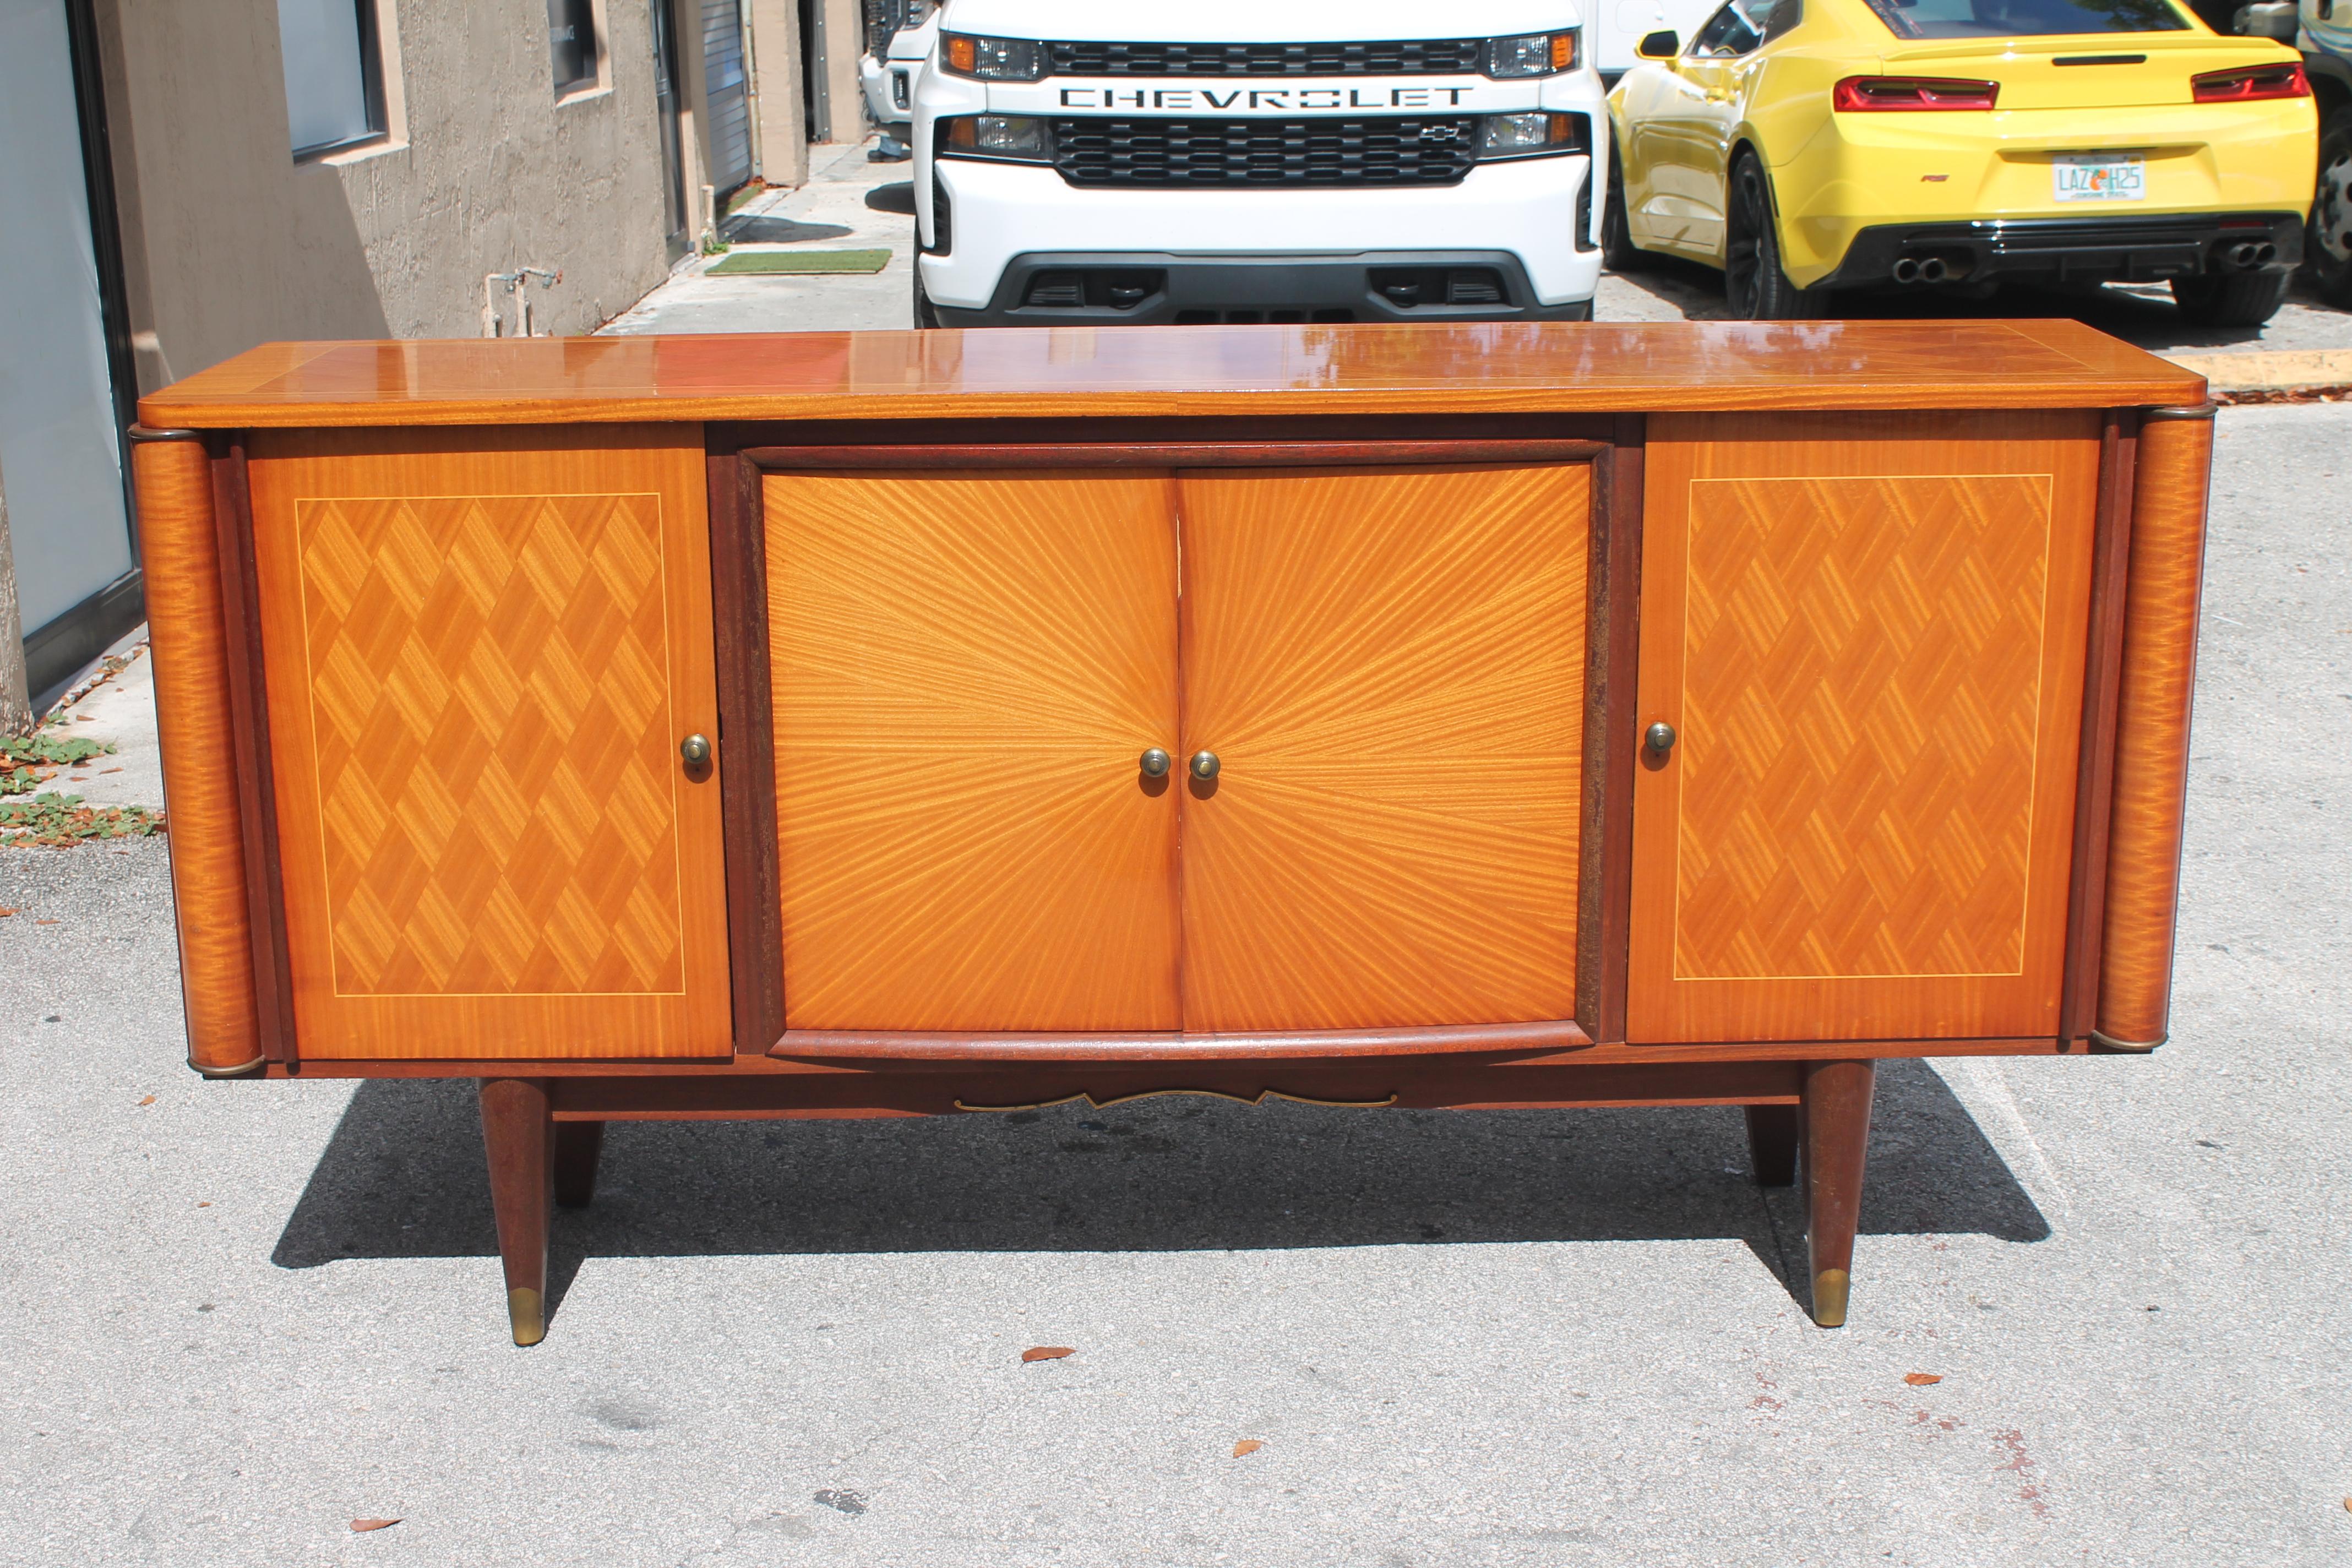 1950's French Art Deco style/ Modern Sycamore with Walnut Buffet. Stunning Sun Rise / Sun Ray Motif. Interior dry bar area and shelving. Diamond inlay detail. French Estate.